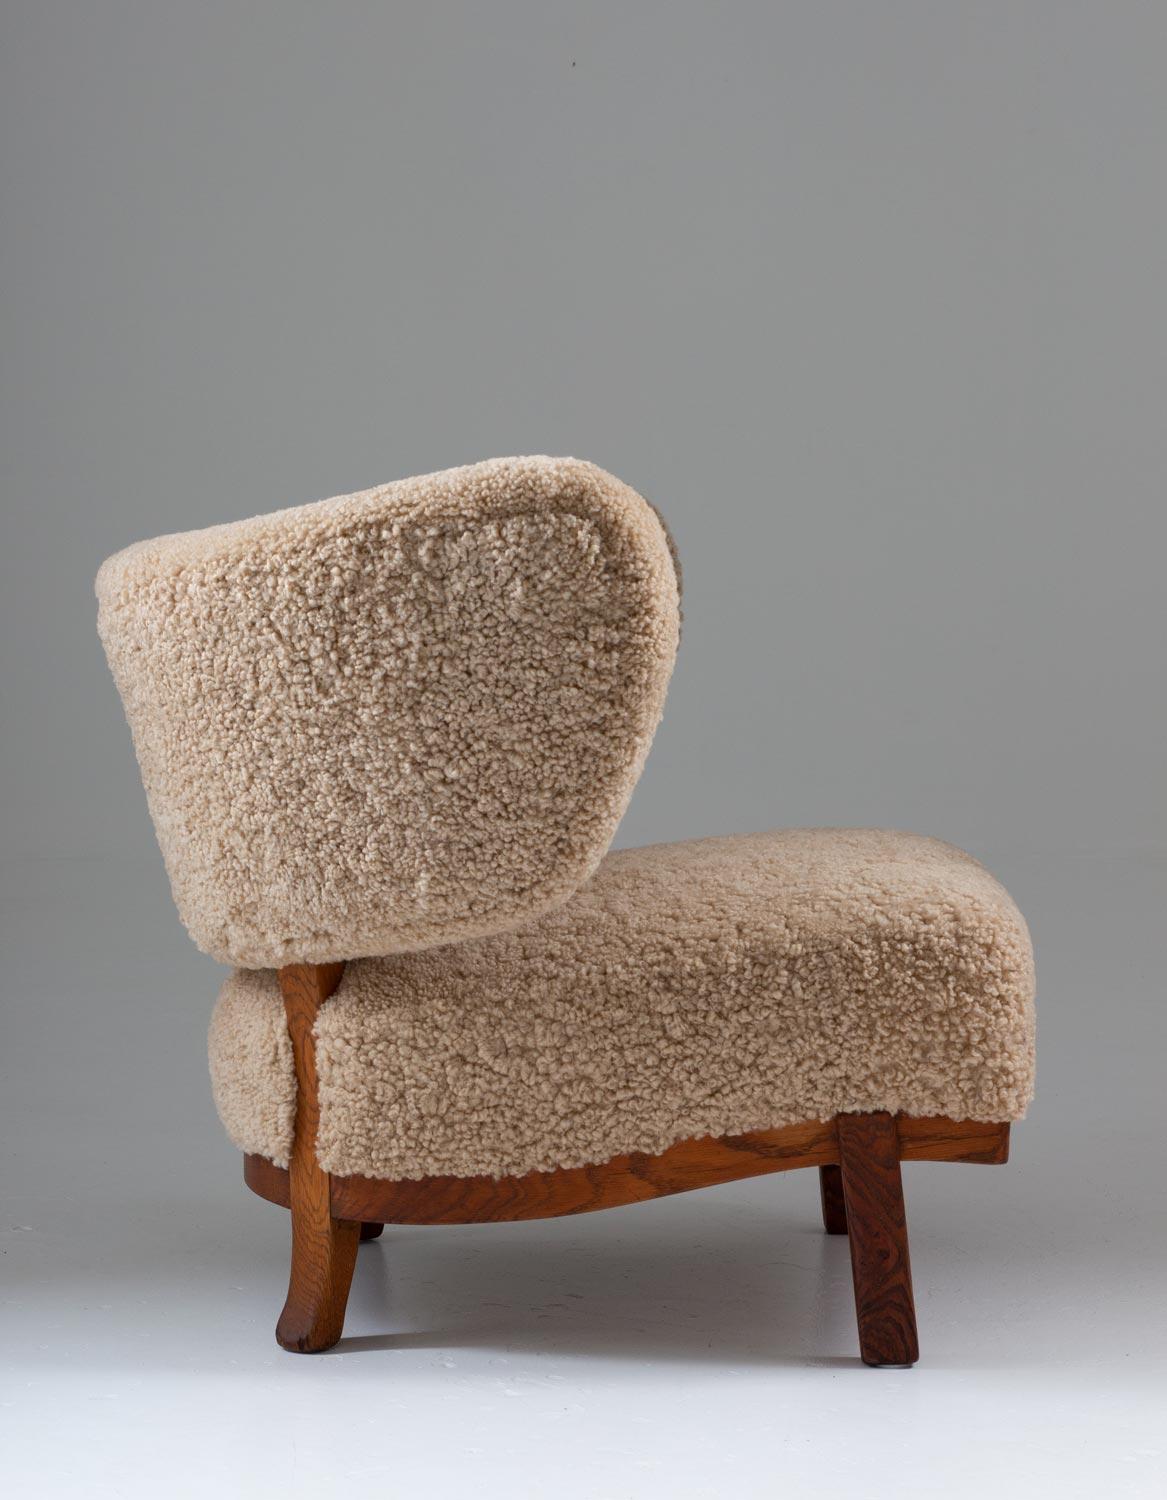 Extremely rare first edition armchair by Otto Schulz for Boet, circa 1940.
This sculptural lounge chair is upholstered in honey-white sheepskin. Its organic forms and harmonious proportions are an excellent example of the greatness of the Swedish